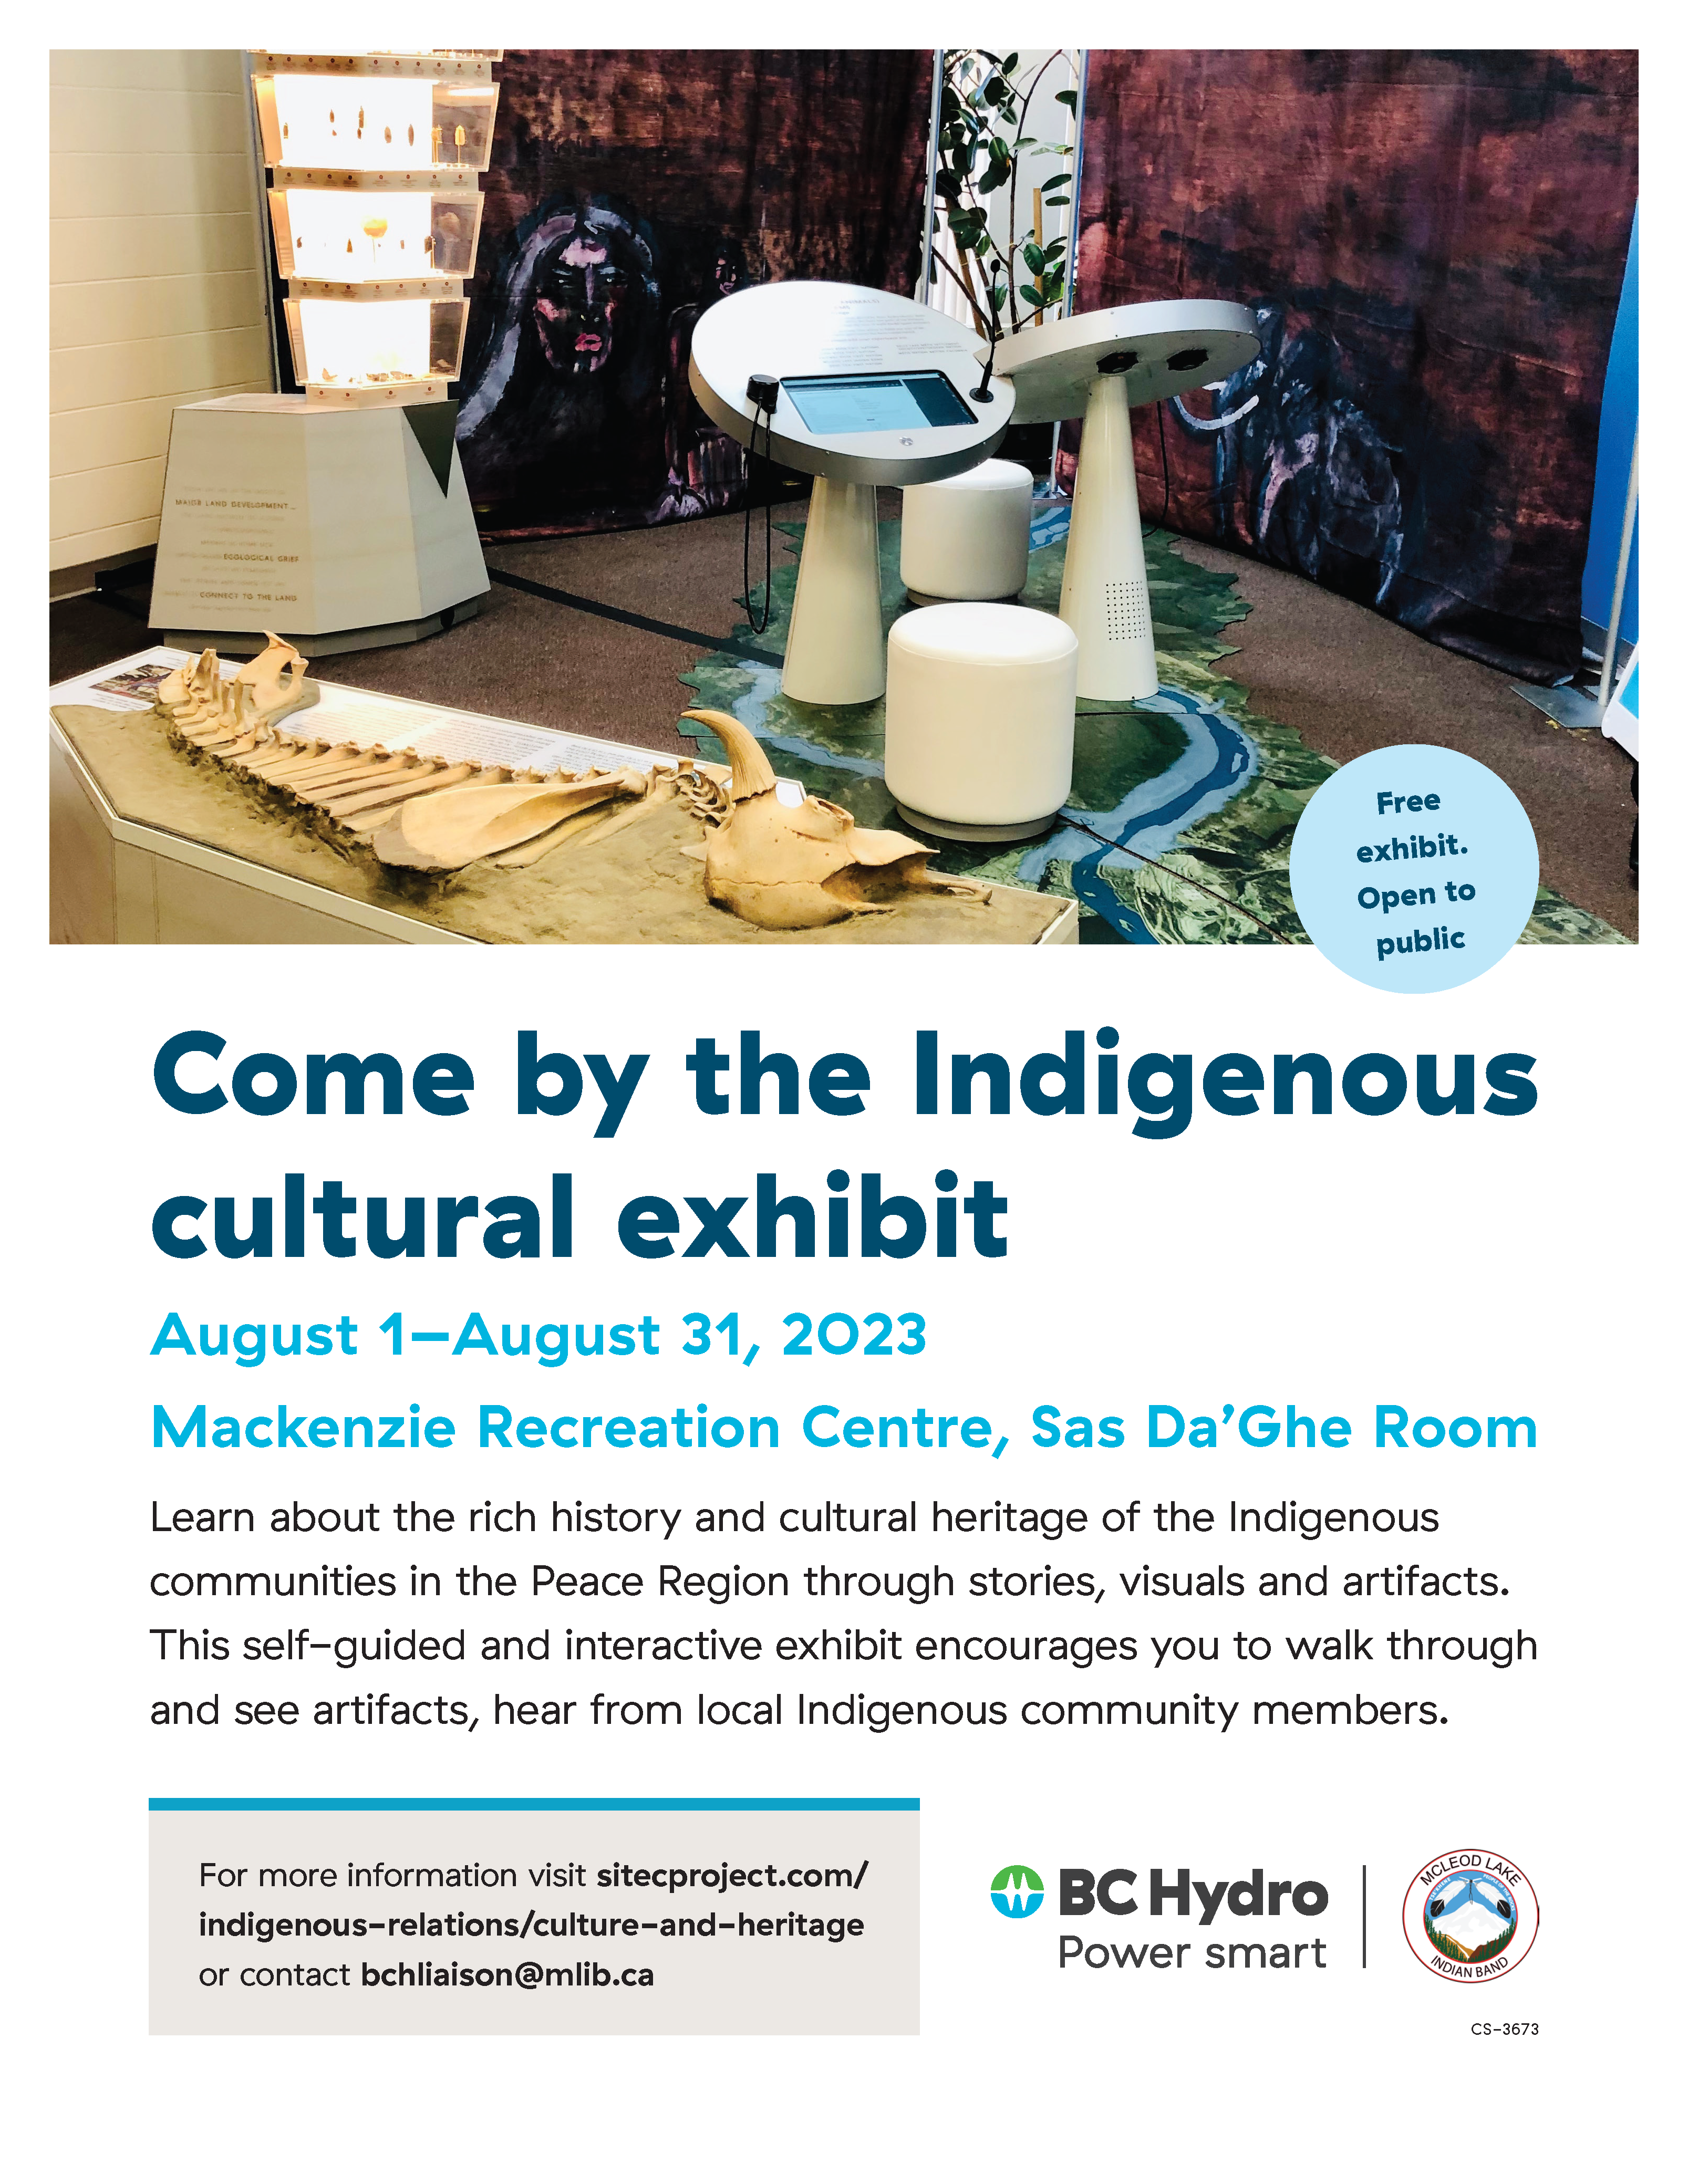 An indigenous cultural exhibit that will be hosted in the Mackenzie Recreation Centre, in the Sas Da'Ghe room from August 1st to August 31st 2023.